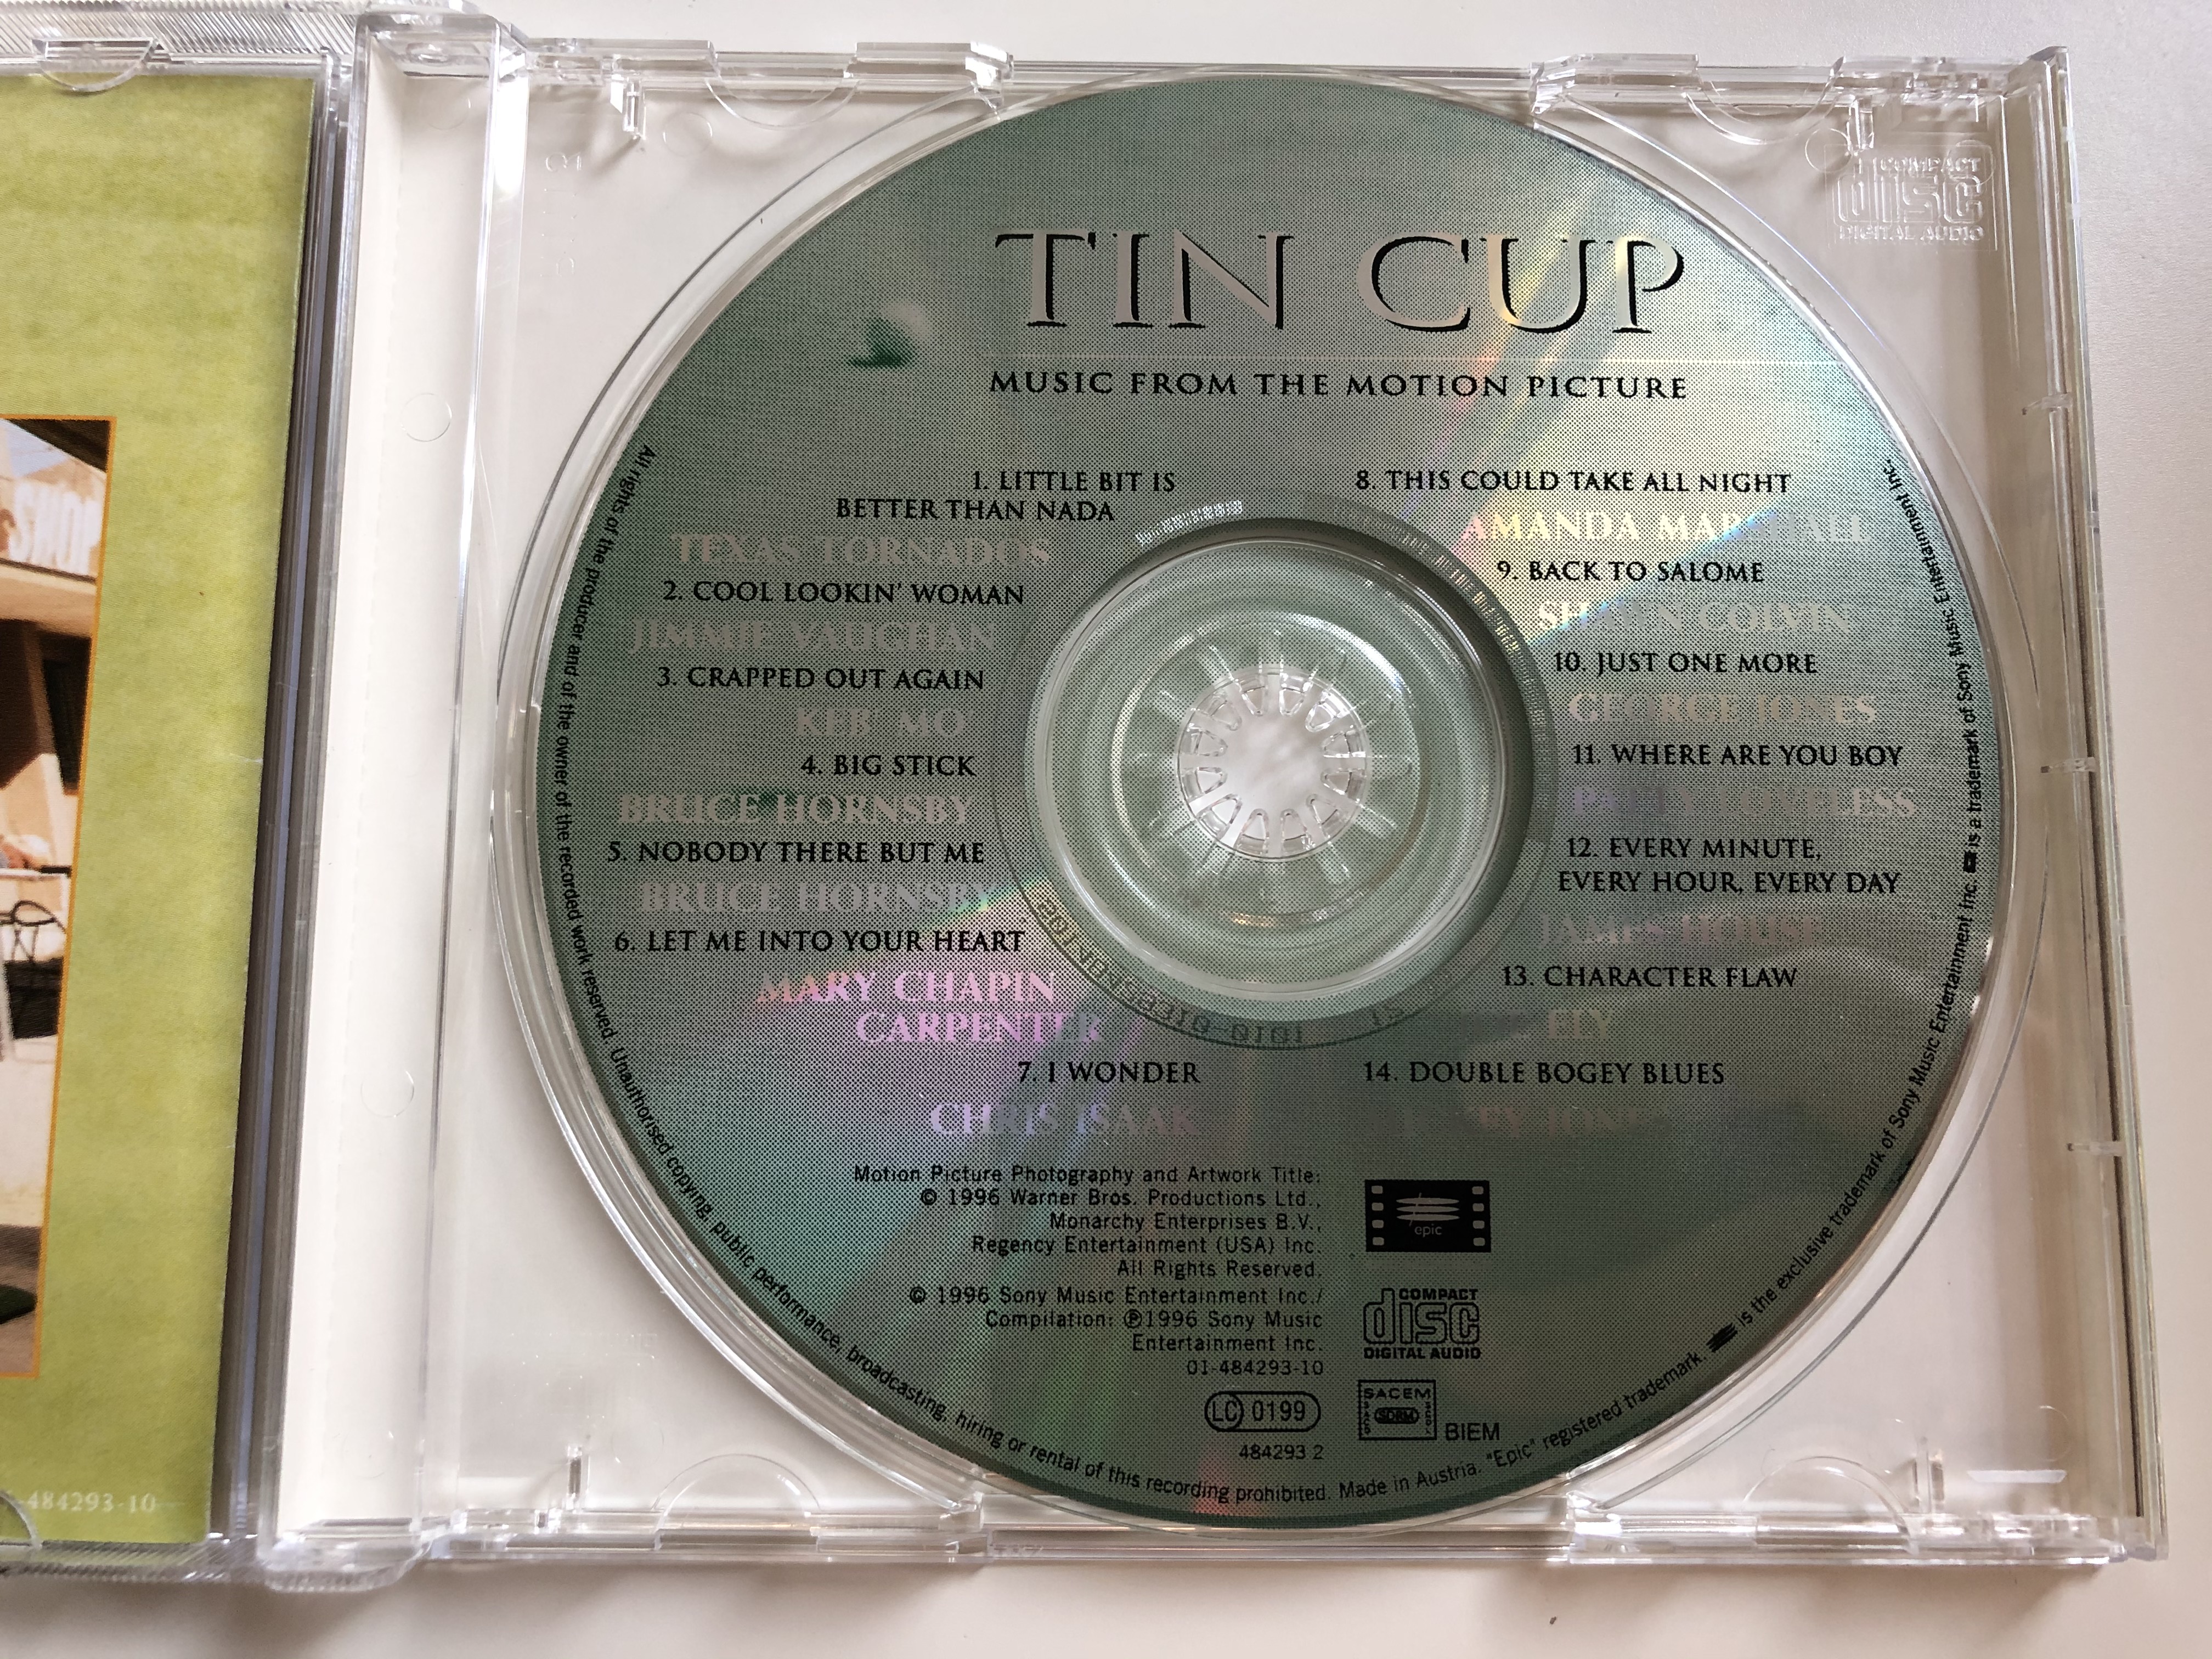 music-from-the-motion-picture-tin-cup-epic-soundtrax-audio-cd-1996-epc-484293-2-4-.jpg